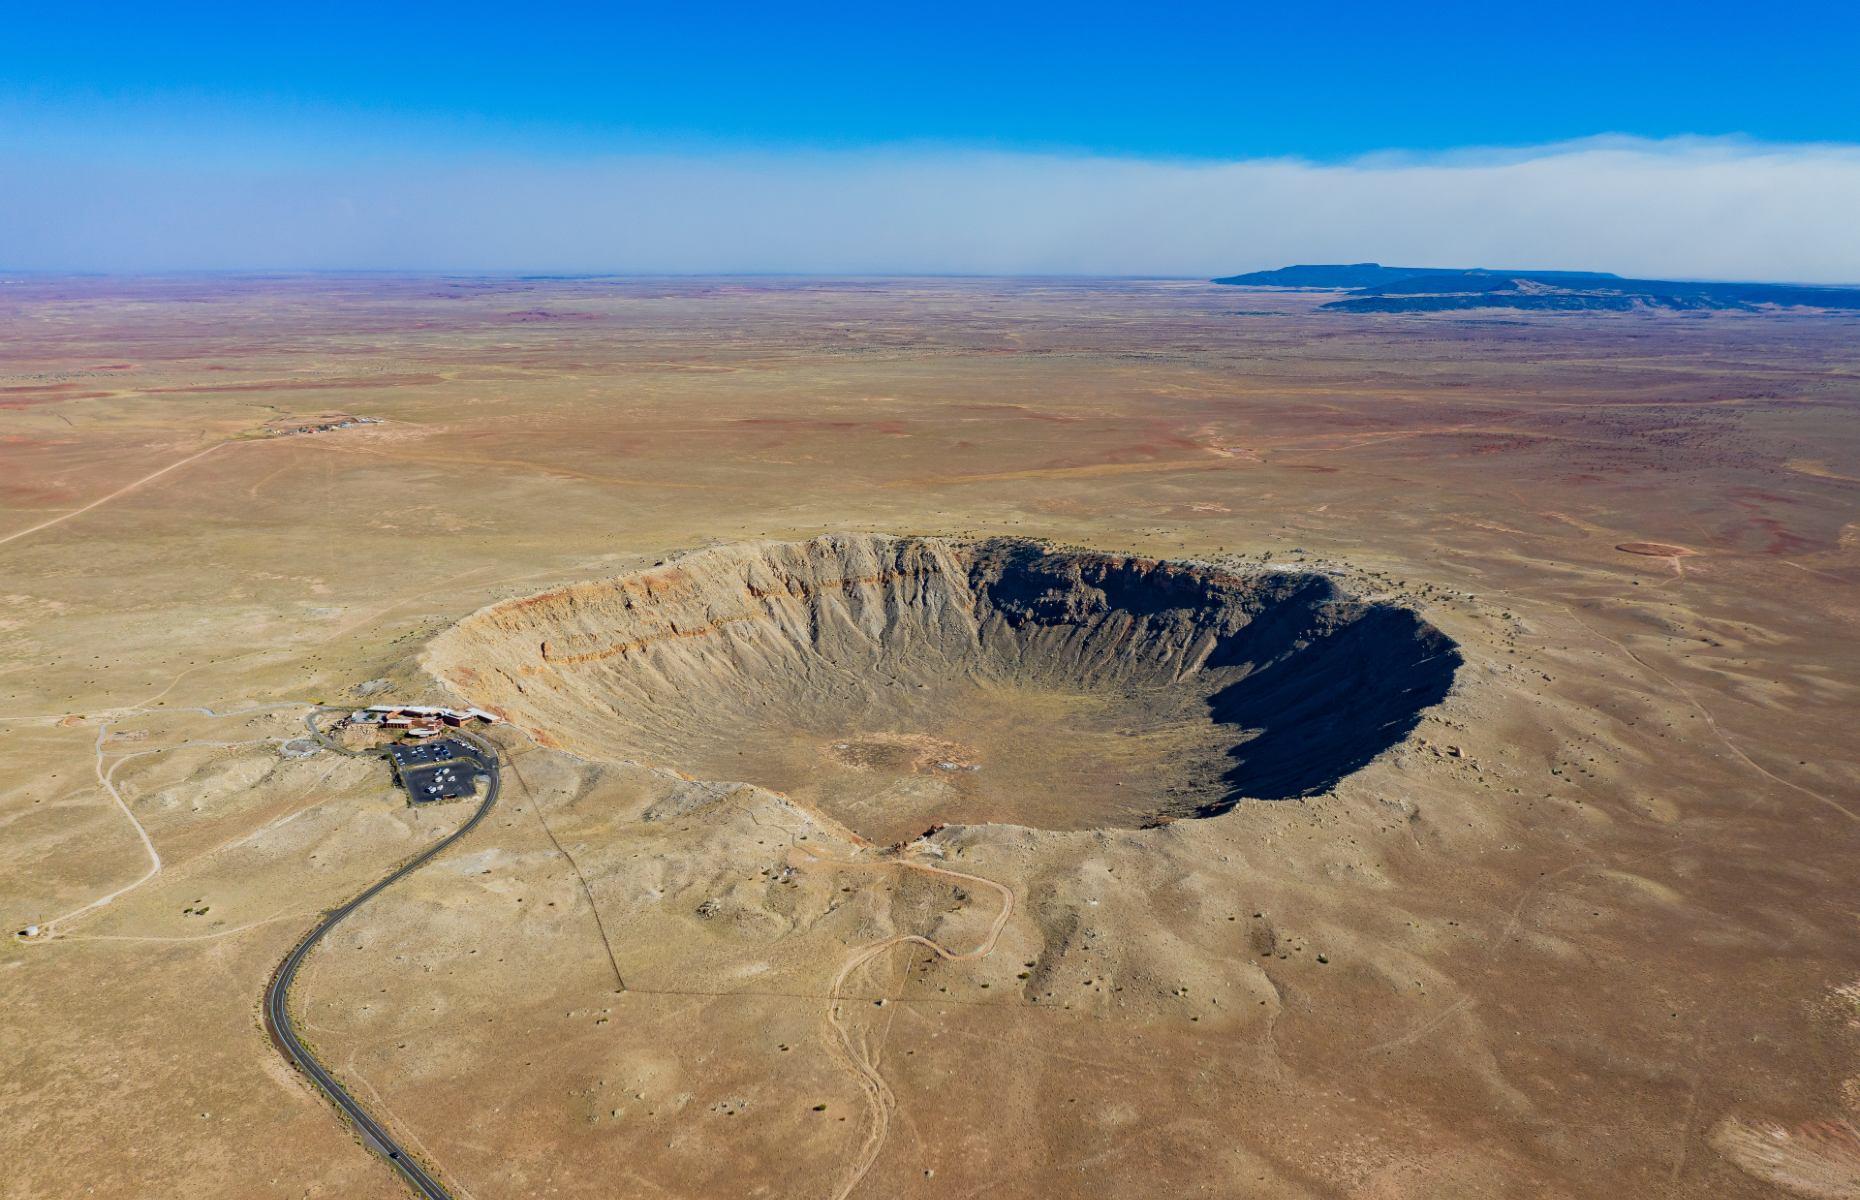 <p>At 50,000 years-old, Meteor Crater (also known as Barringer Crater) located just off the Interstate 40 in northern Arizona is actually young compared to other craters on Earth. What’s more, the 3,900-foot (1,189m) wide hollow is considered the best-preserved example out there. To visit the extraterrestrial attraction, you’ll need a ticket to the adjoining <a href="https://meteorcrater.com/">museum</a>, which also has a 4D theater for learning about the impact of asteroid collisions, an Apollo 11 Space Capsule and an interactive space exhibit.</p>